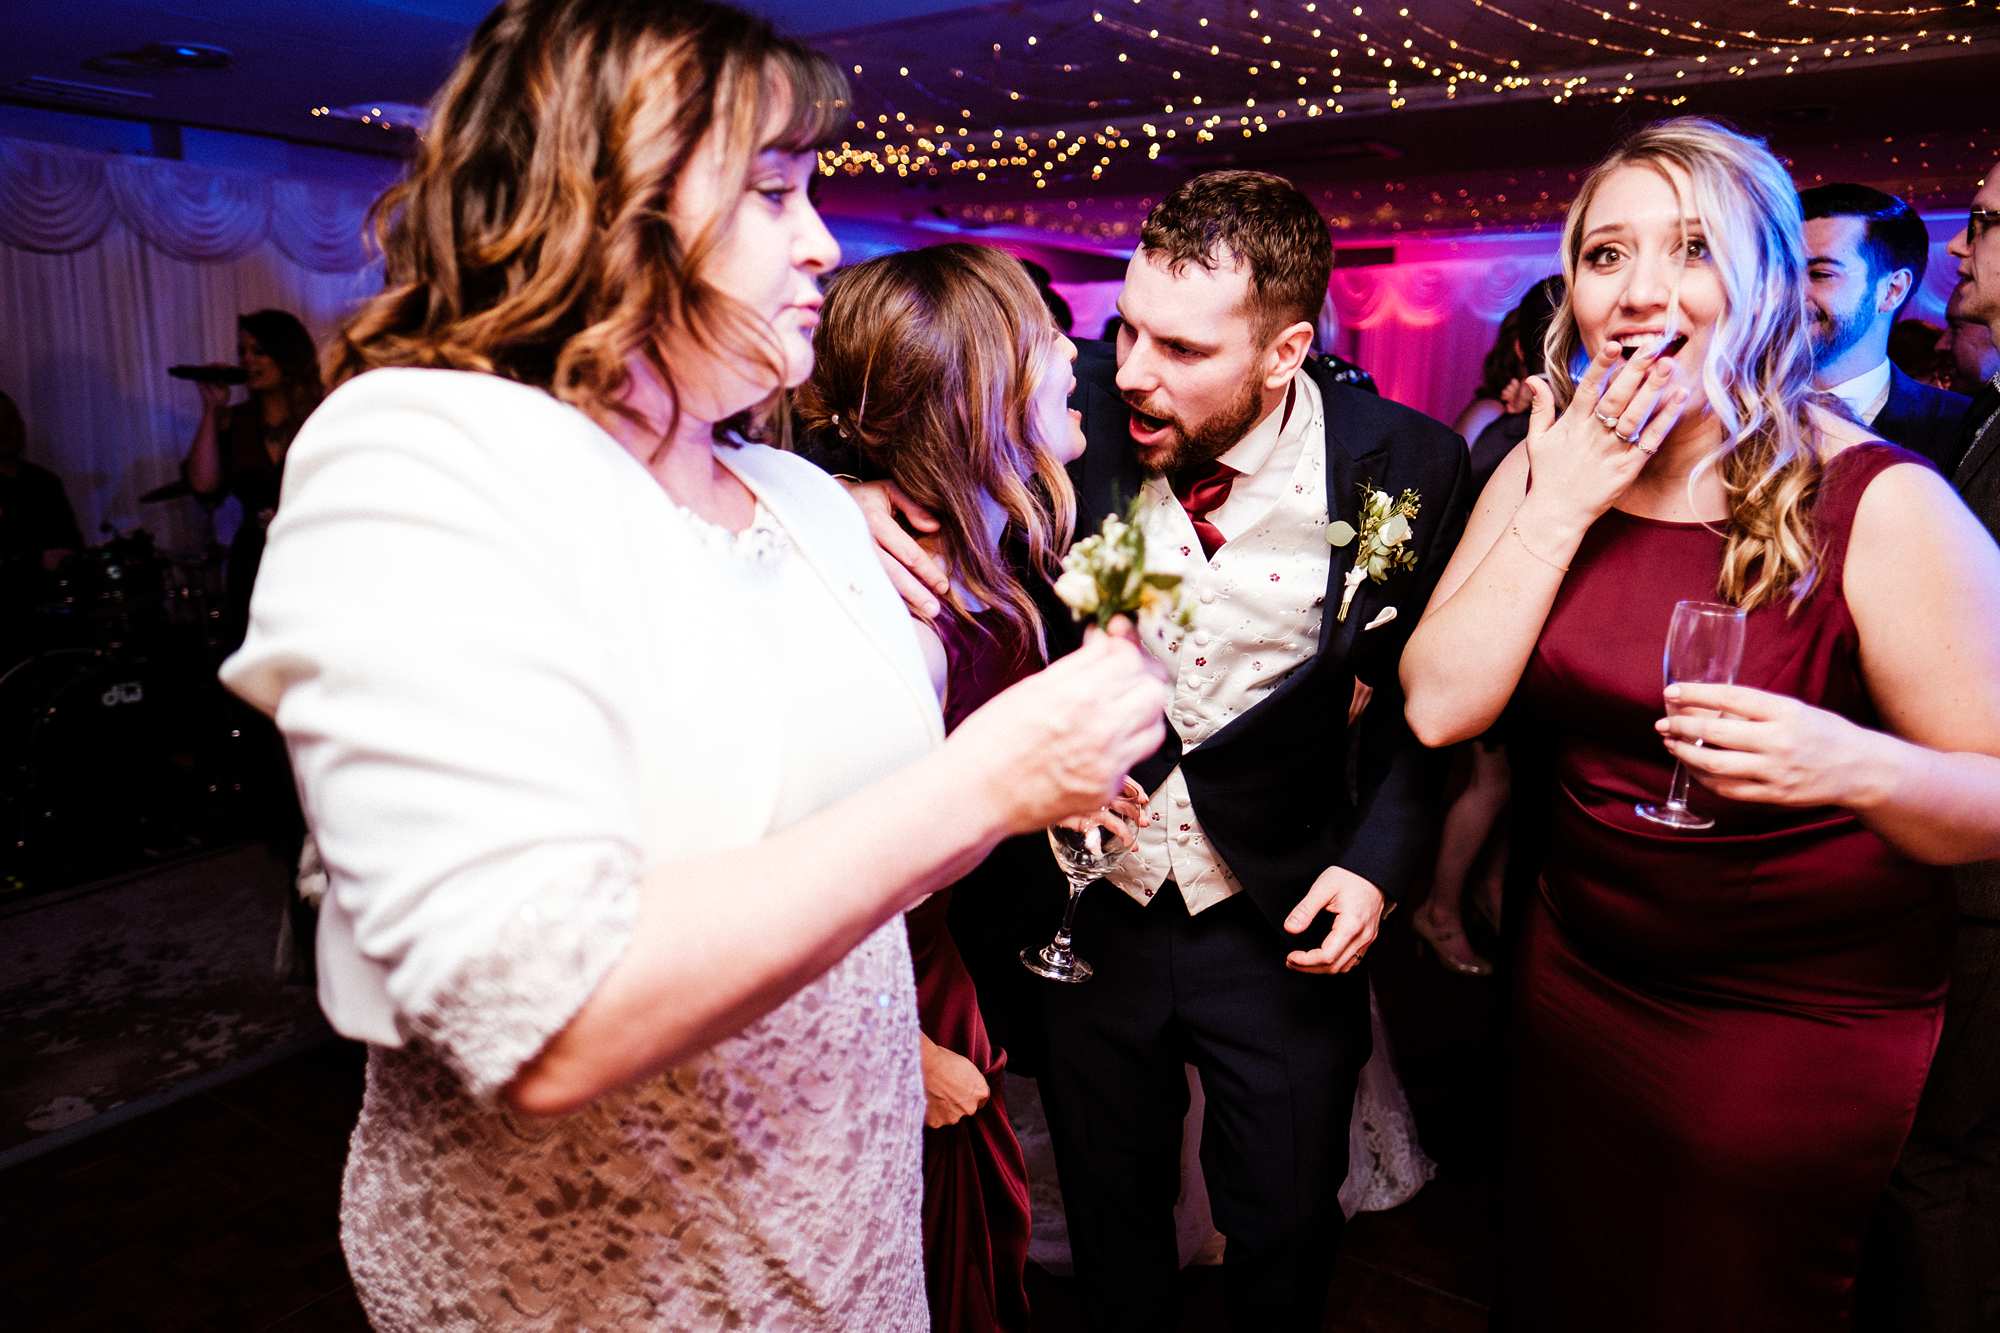 Evening party at a February wedding at Highfield Park in Hampshire